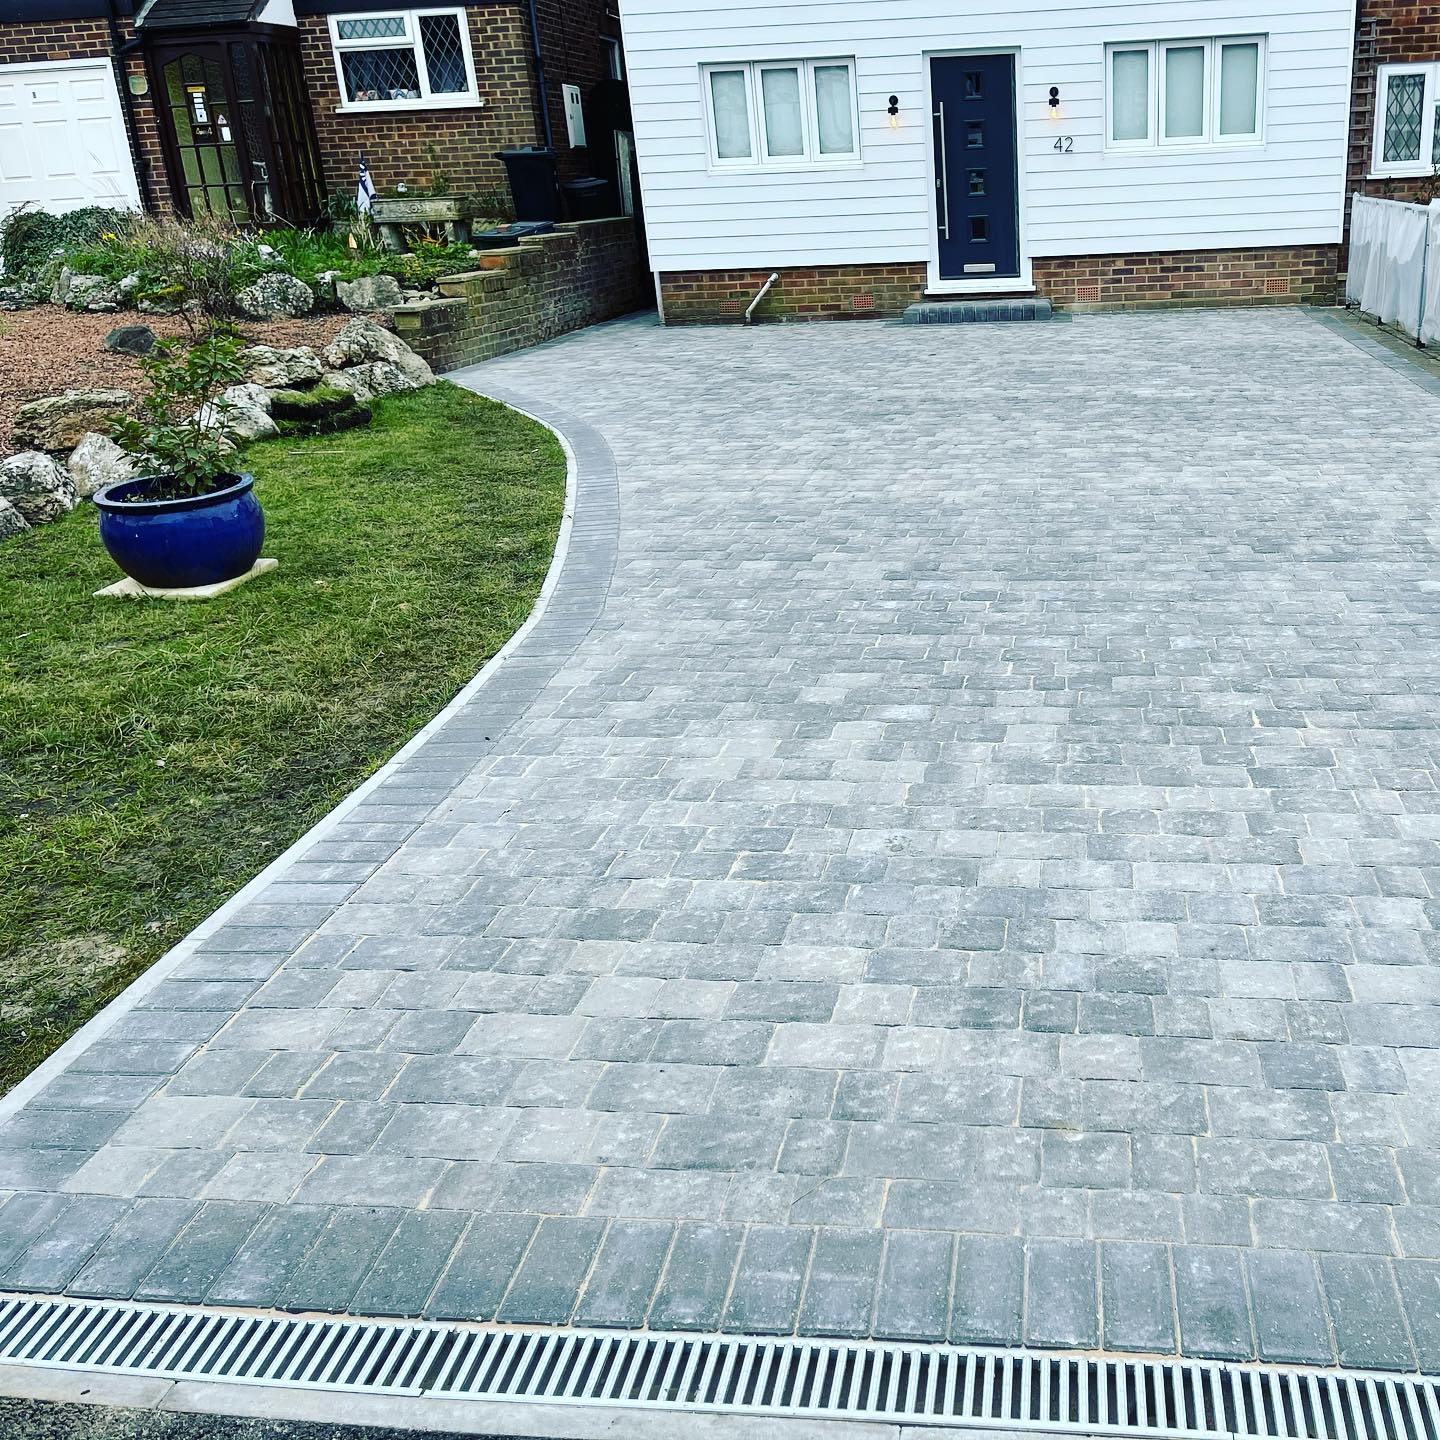 Do You Want To Enhance The Aesthetic Appeal Of Your Property? Try Brick Patios!